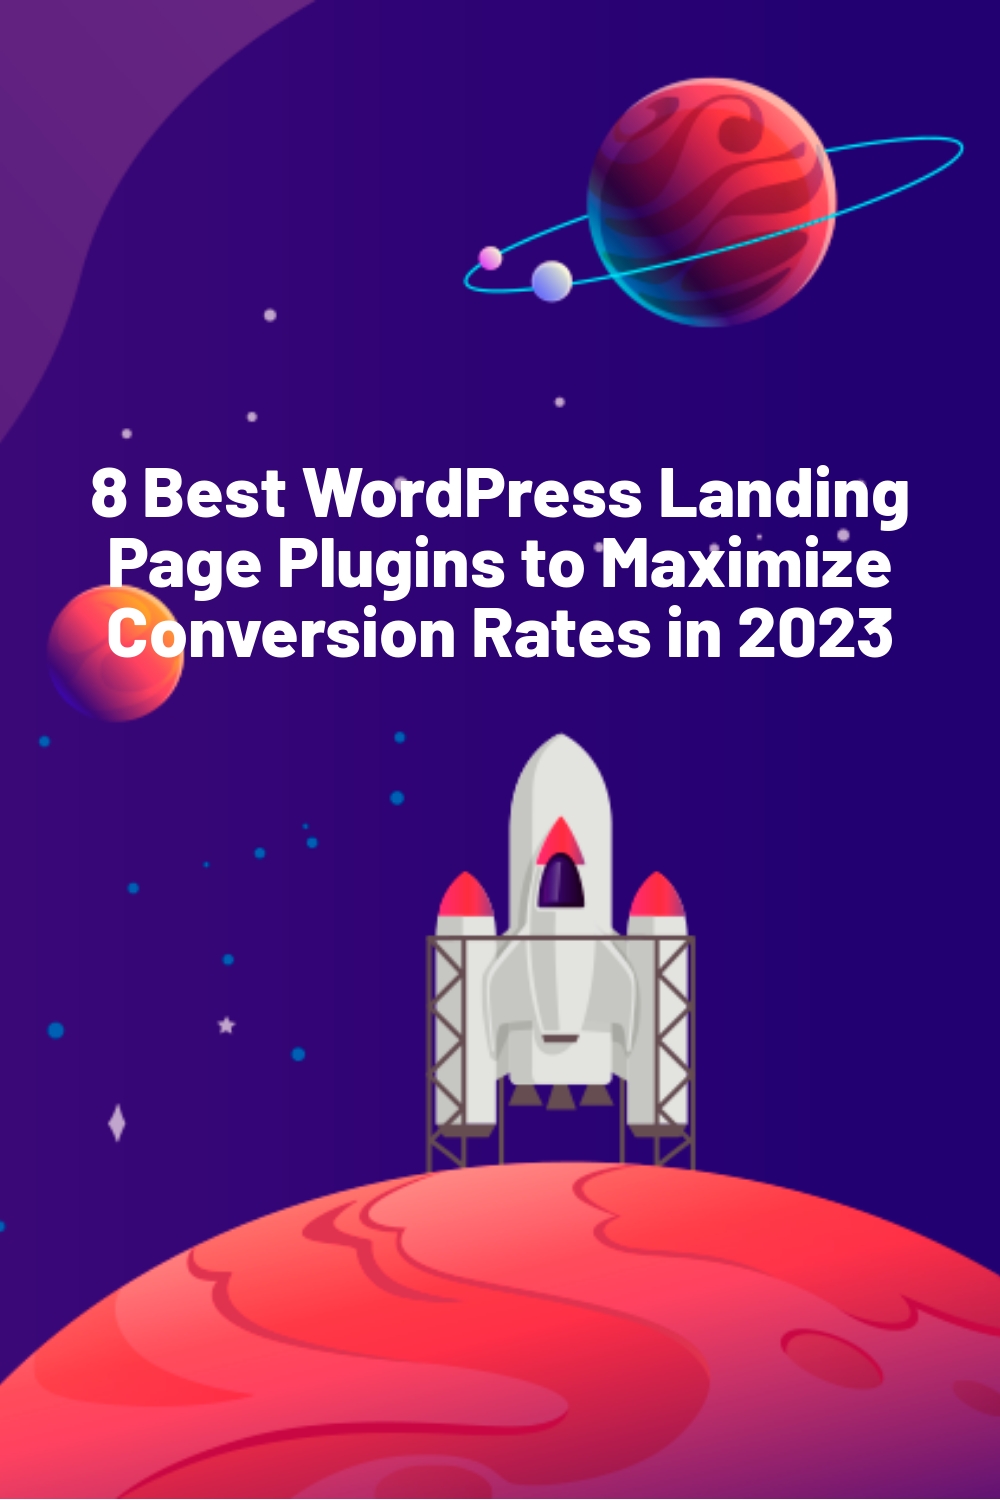 8 Best WordPress Landing Page Plugins to Maximize Conversion Rates in 2023